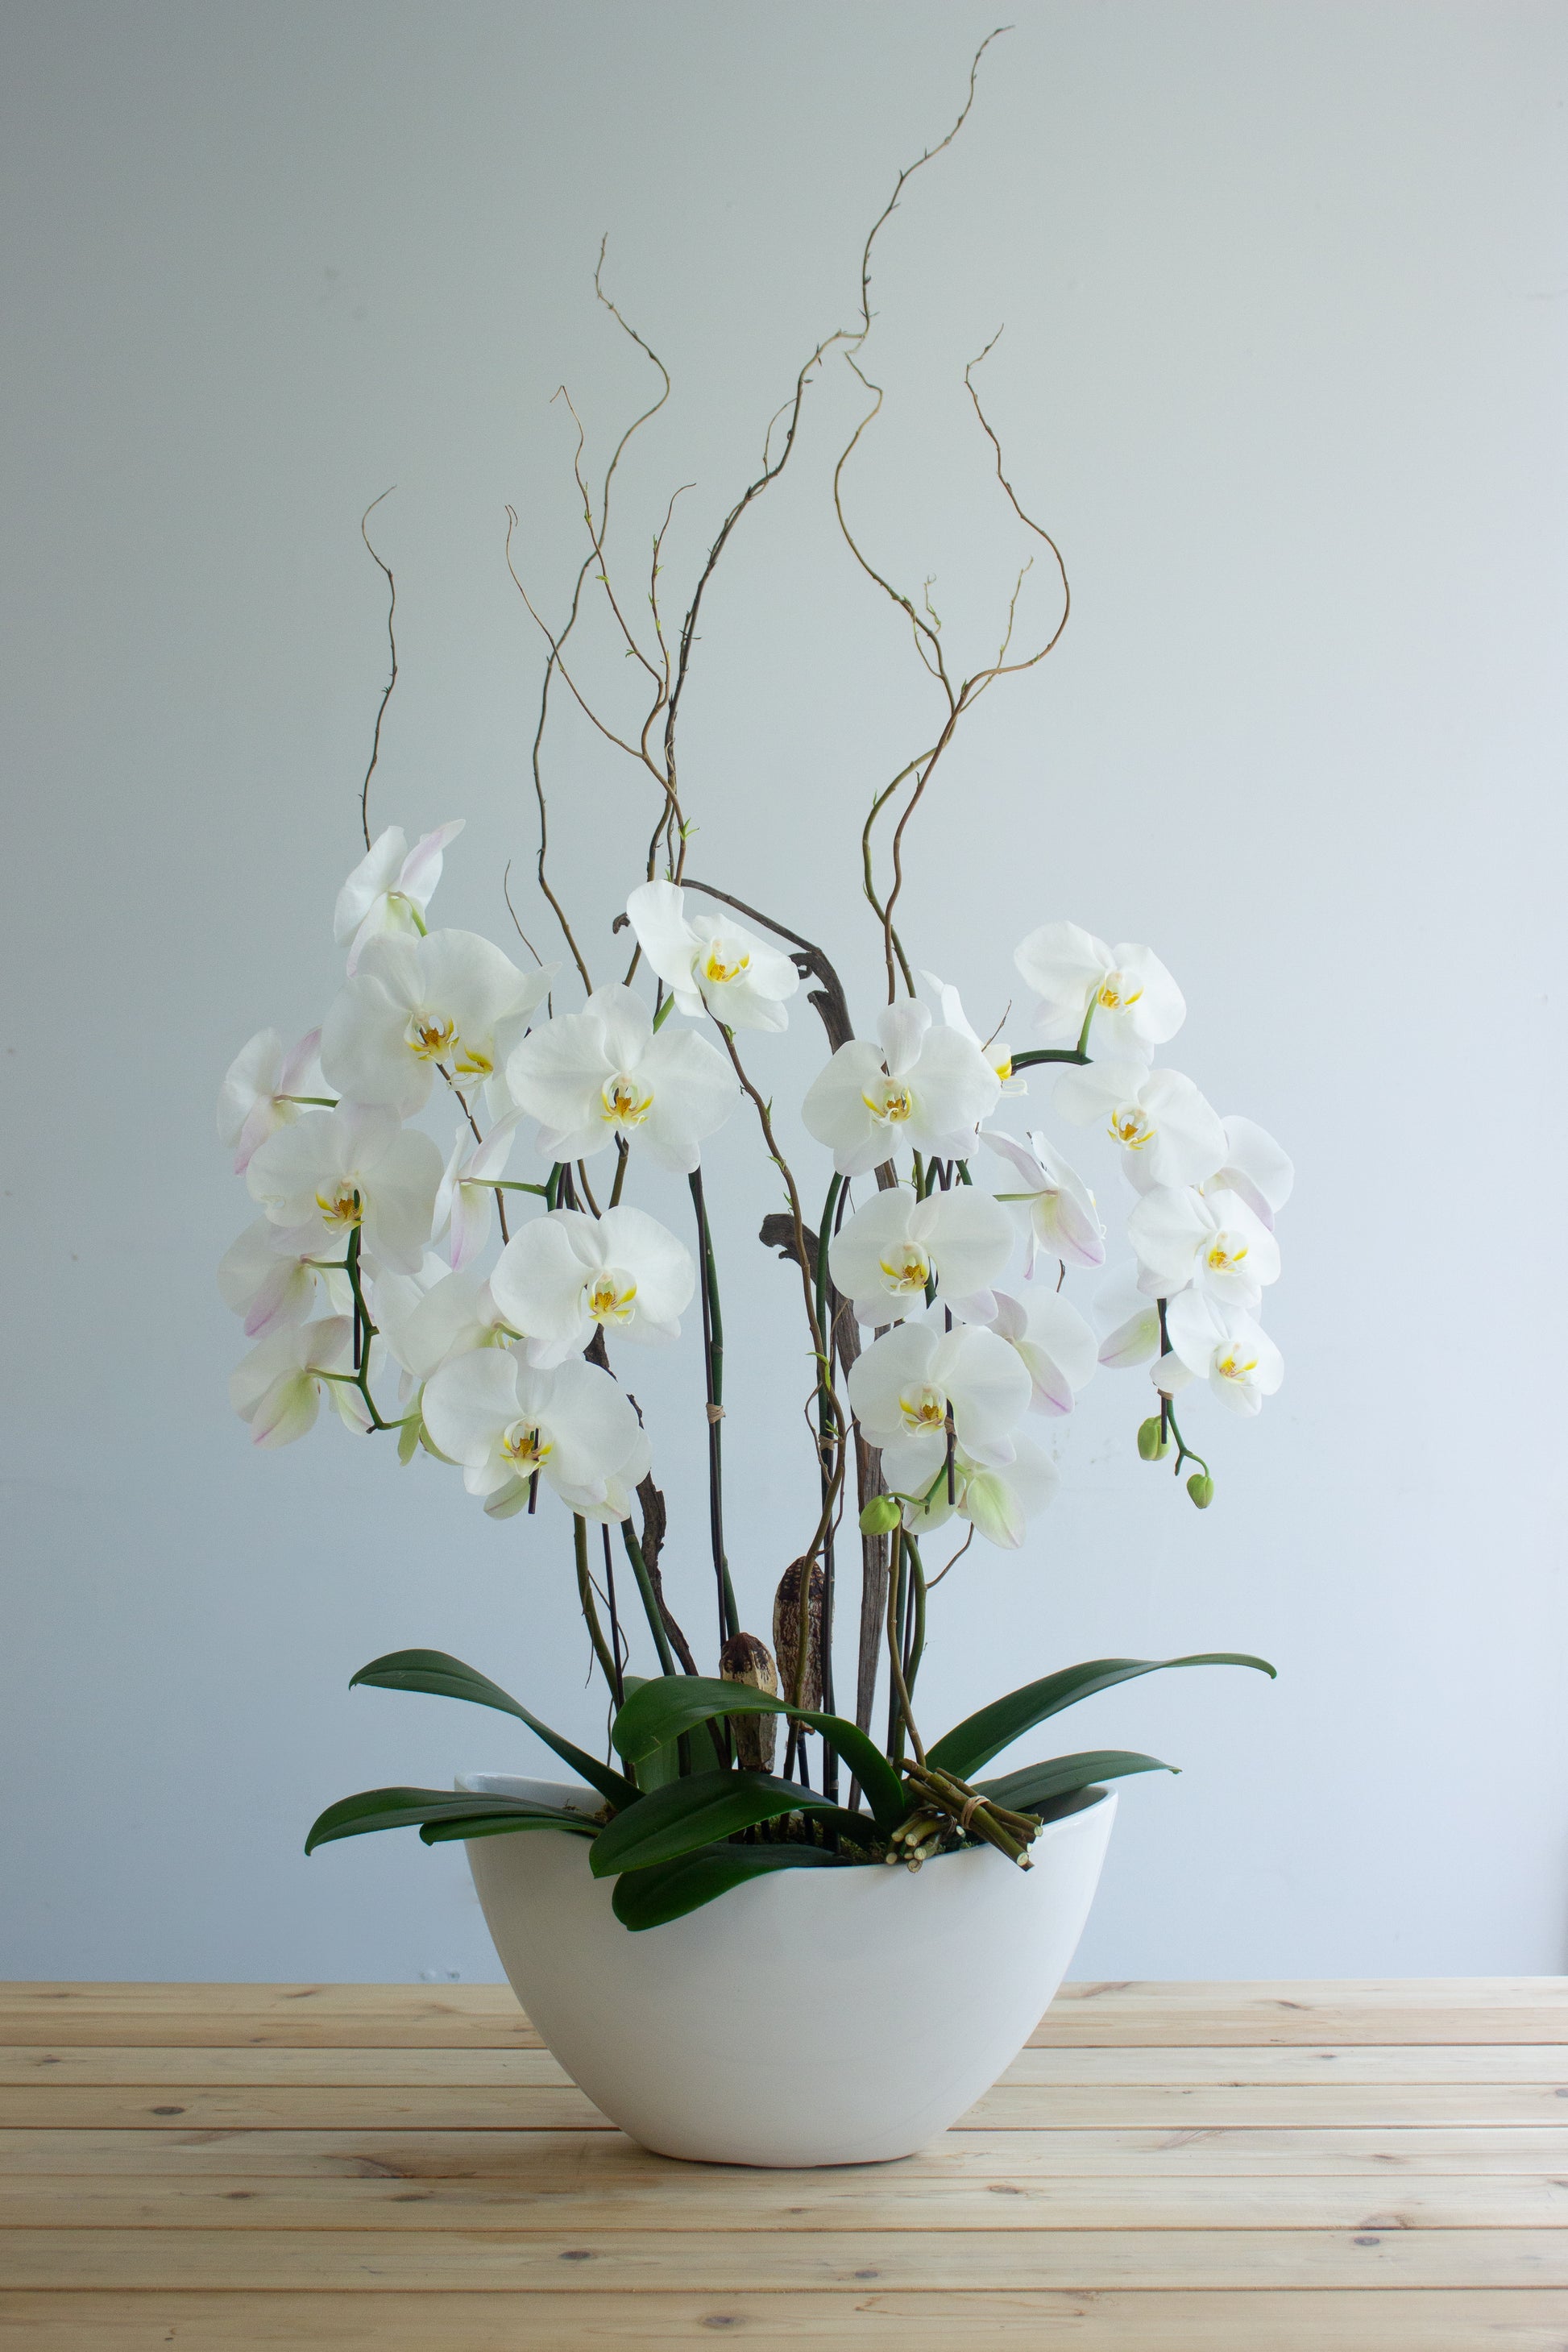 White Orchids. Photography by Vibeke Silverthorne, 2023.